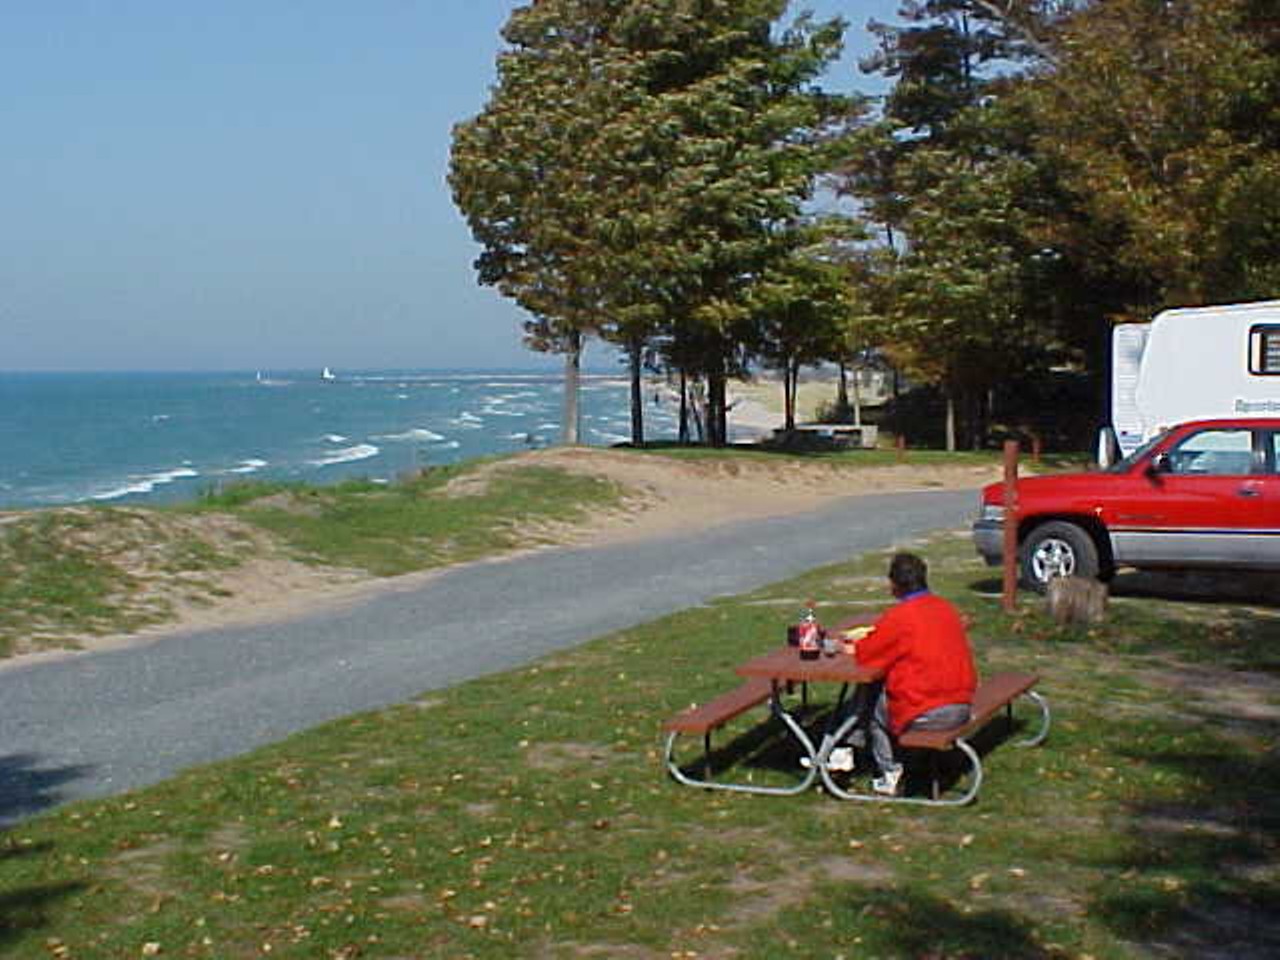 Buttersville Campground991 S. Lakeshore Drive
Ludington, MI 49431 | (231) 843-2114This 18.5 acre, state-licensed campground is situated on the bluffs overlooking Lake Michigan. It's beautiful, it's wooded but beachy, and hey, the name doesn't get any better. Campsites are available May through October, with limited sites available for reservation. Call after May 1 for reservations. (Photo via Facebook, Buttersville Campground)